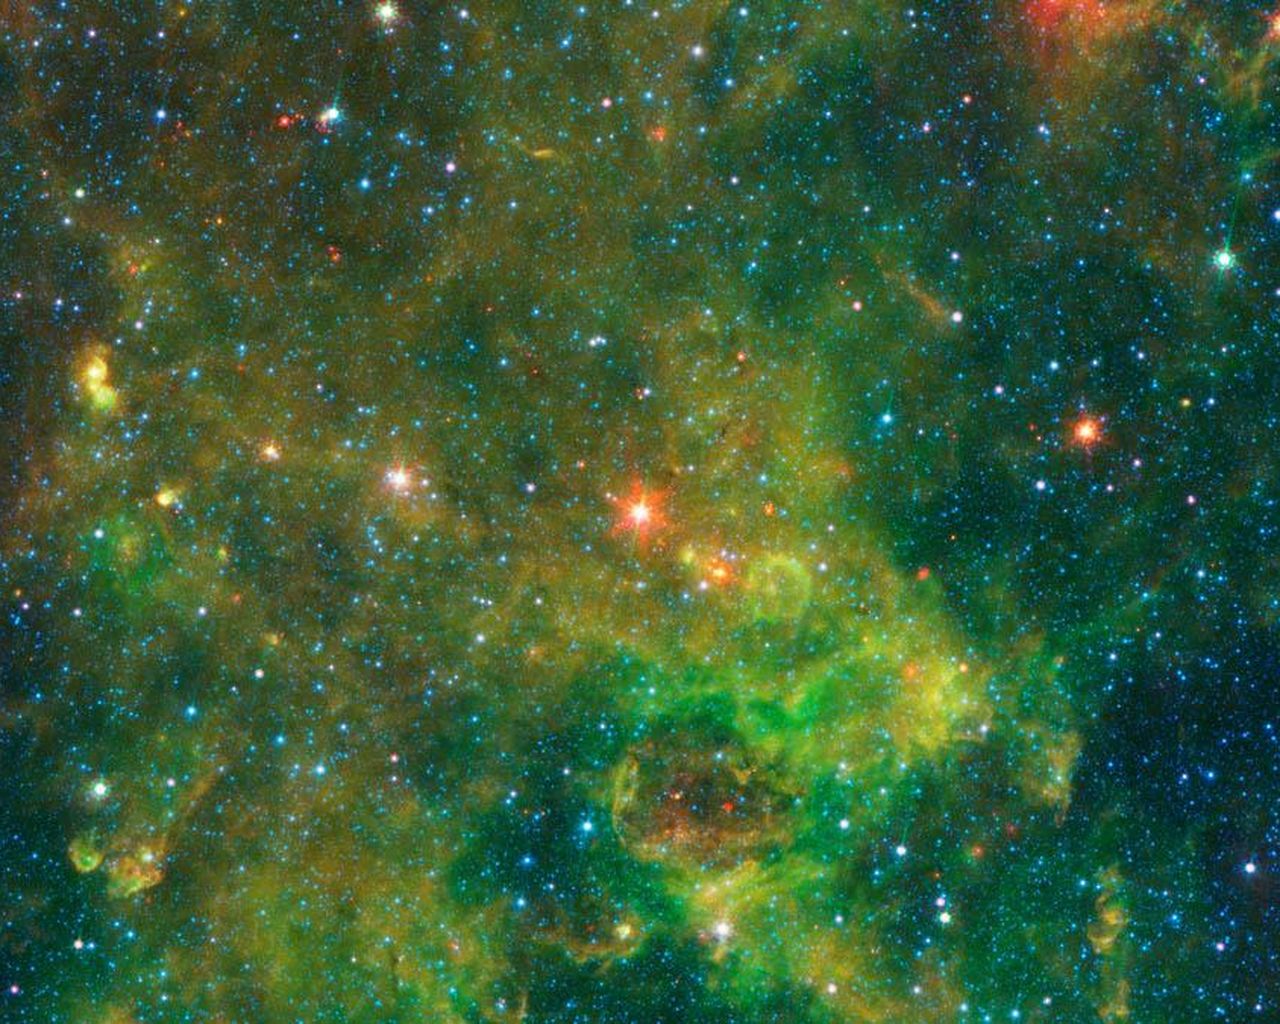 Space Images | Age-Defying Star